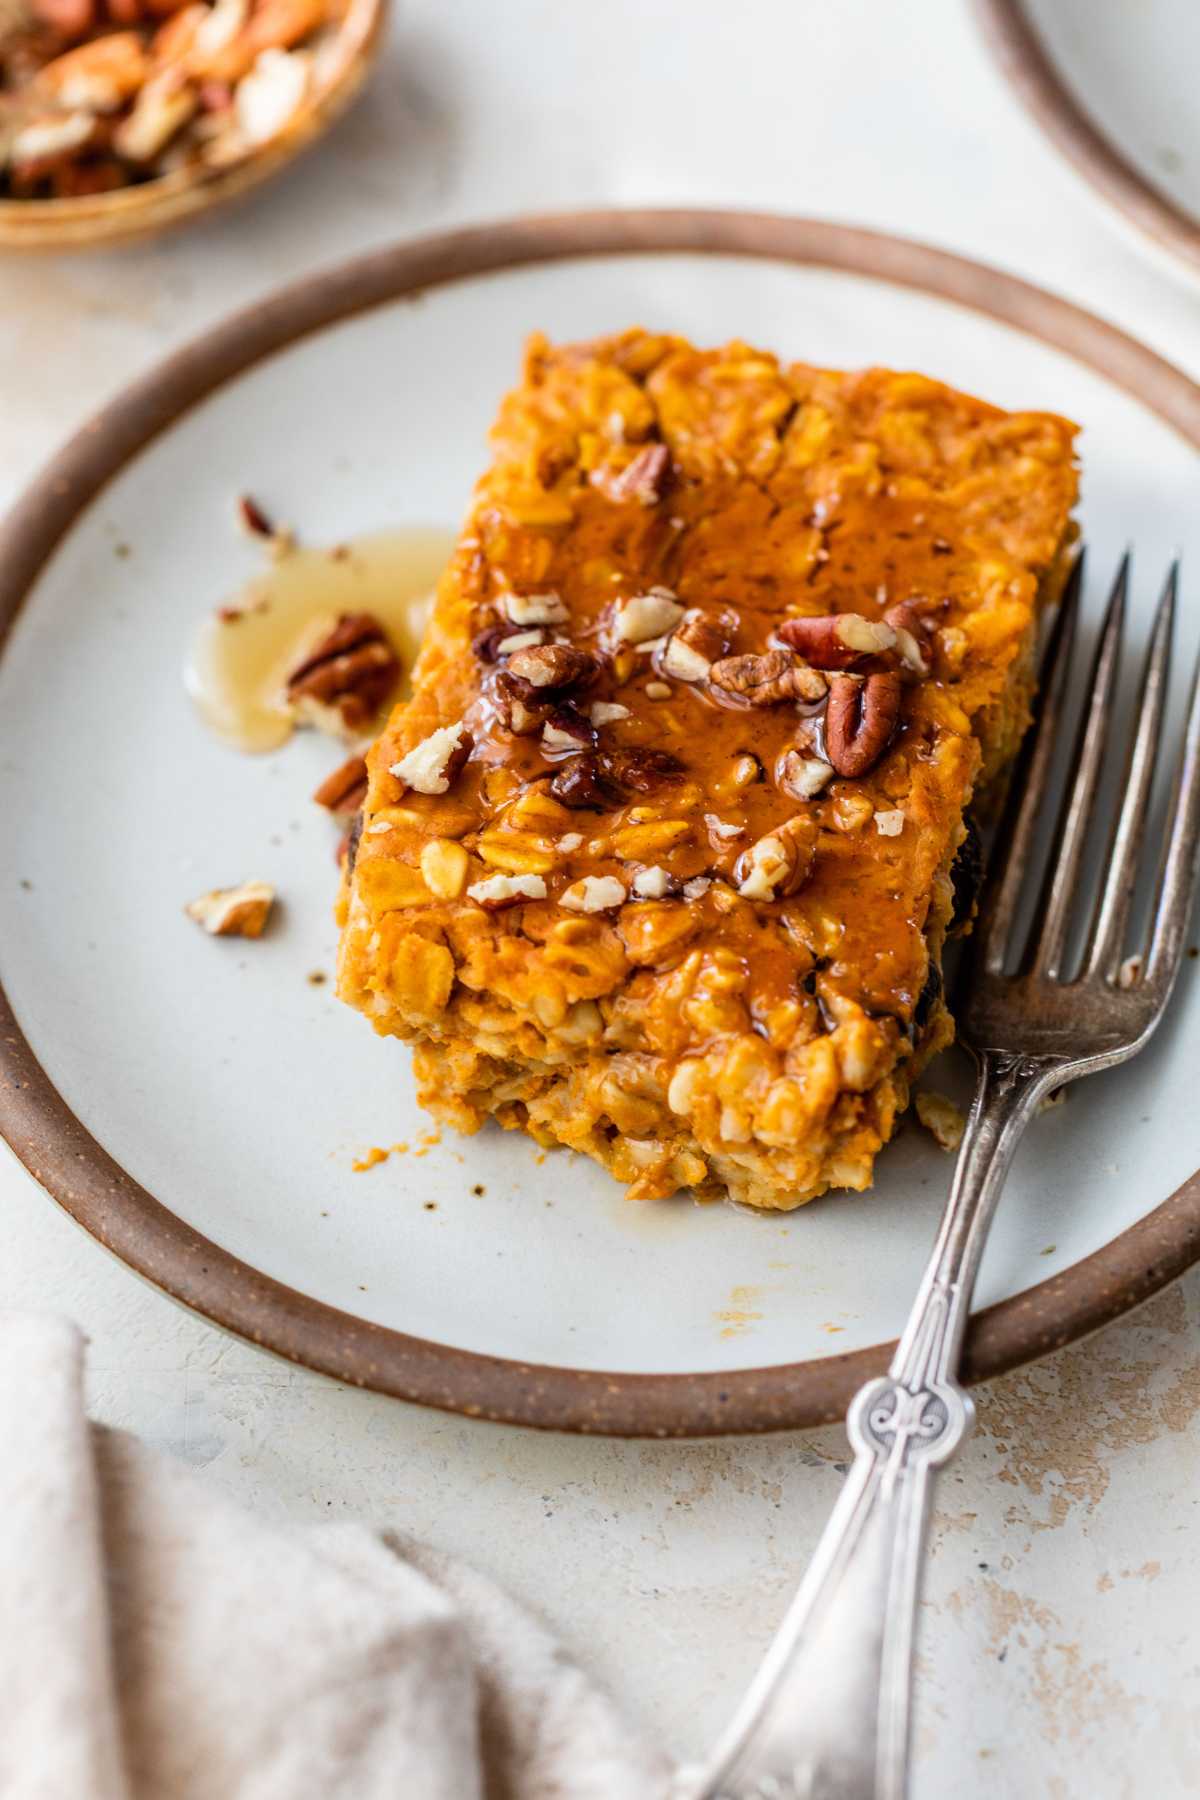 Slice of baked pumpkin oatmeal topped with syrup and chopped pecans on a white plate.